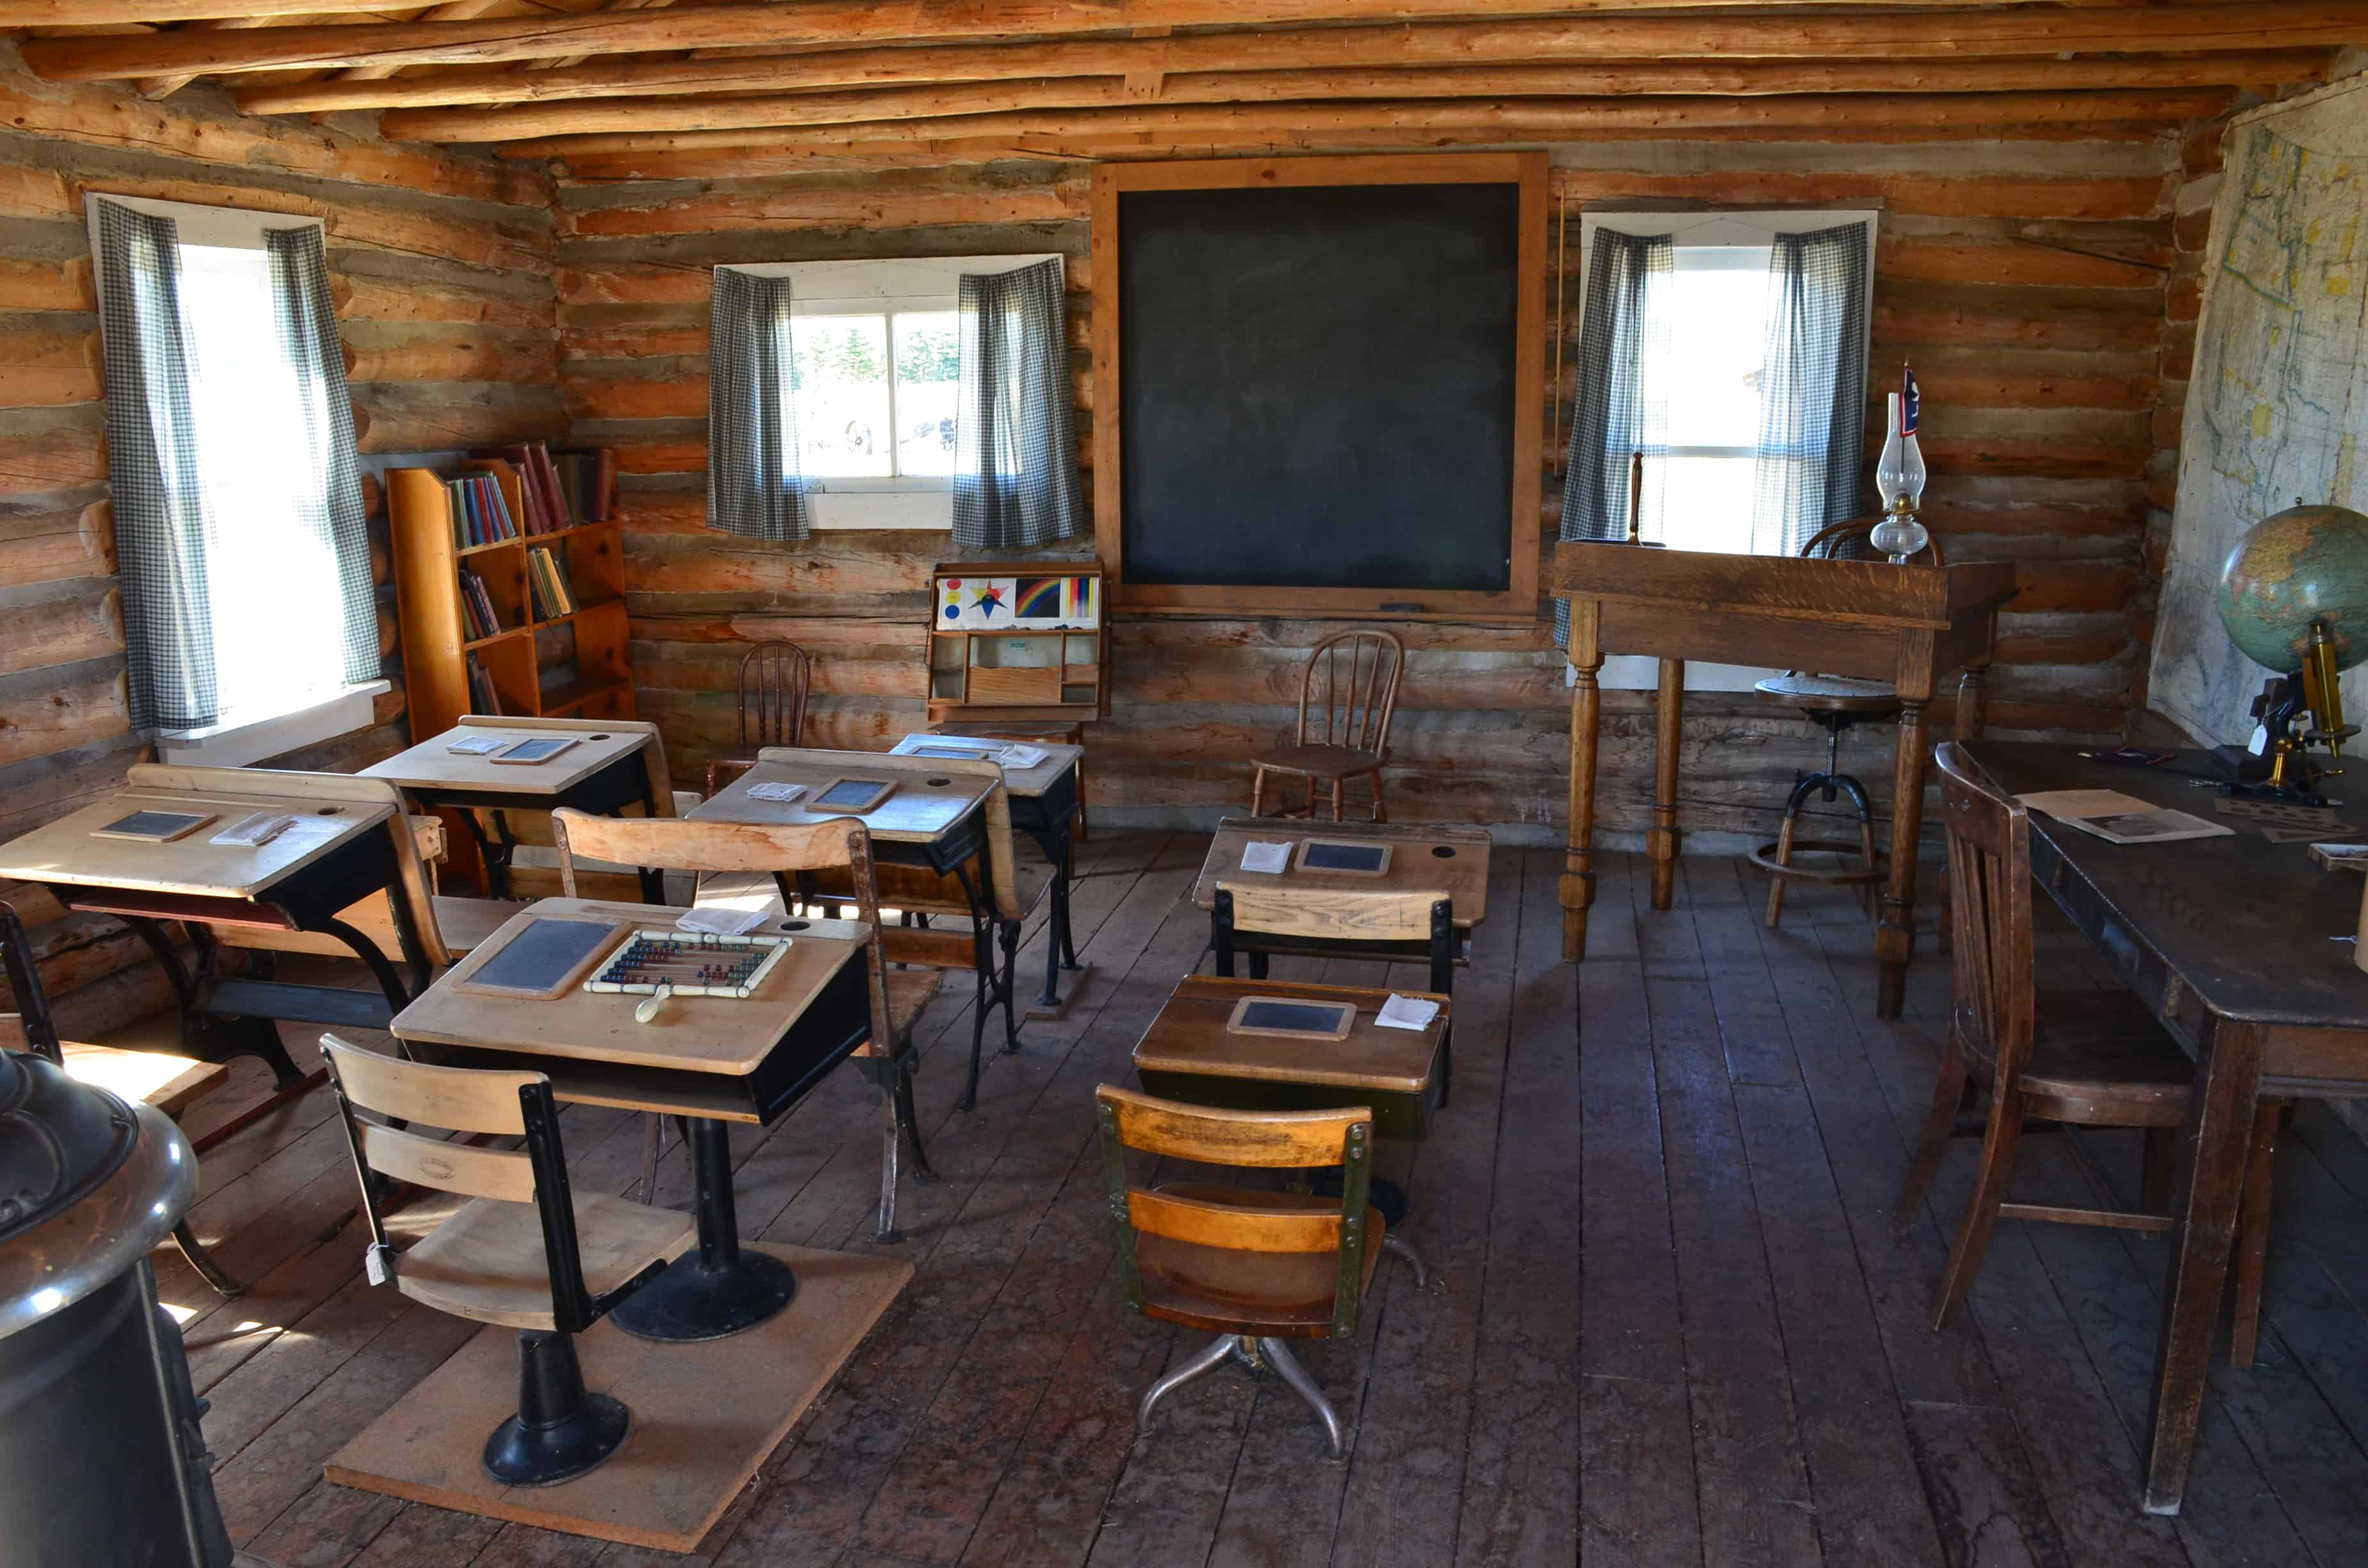 Chimney Rock Ranch schoolhouse at the pioneer village at Wyoming Territorial Prison State Historic Site in Laramie